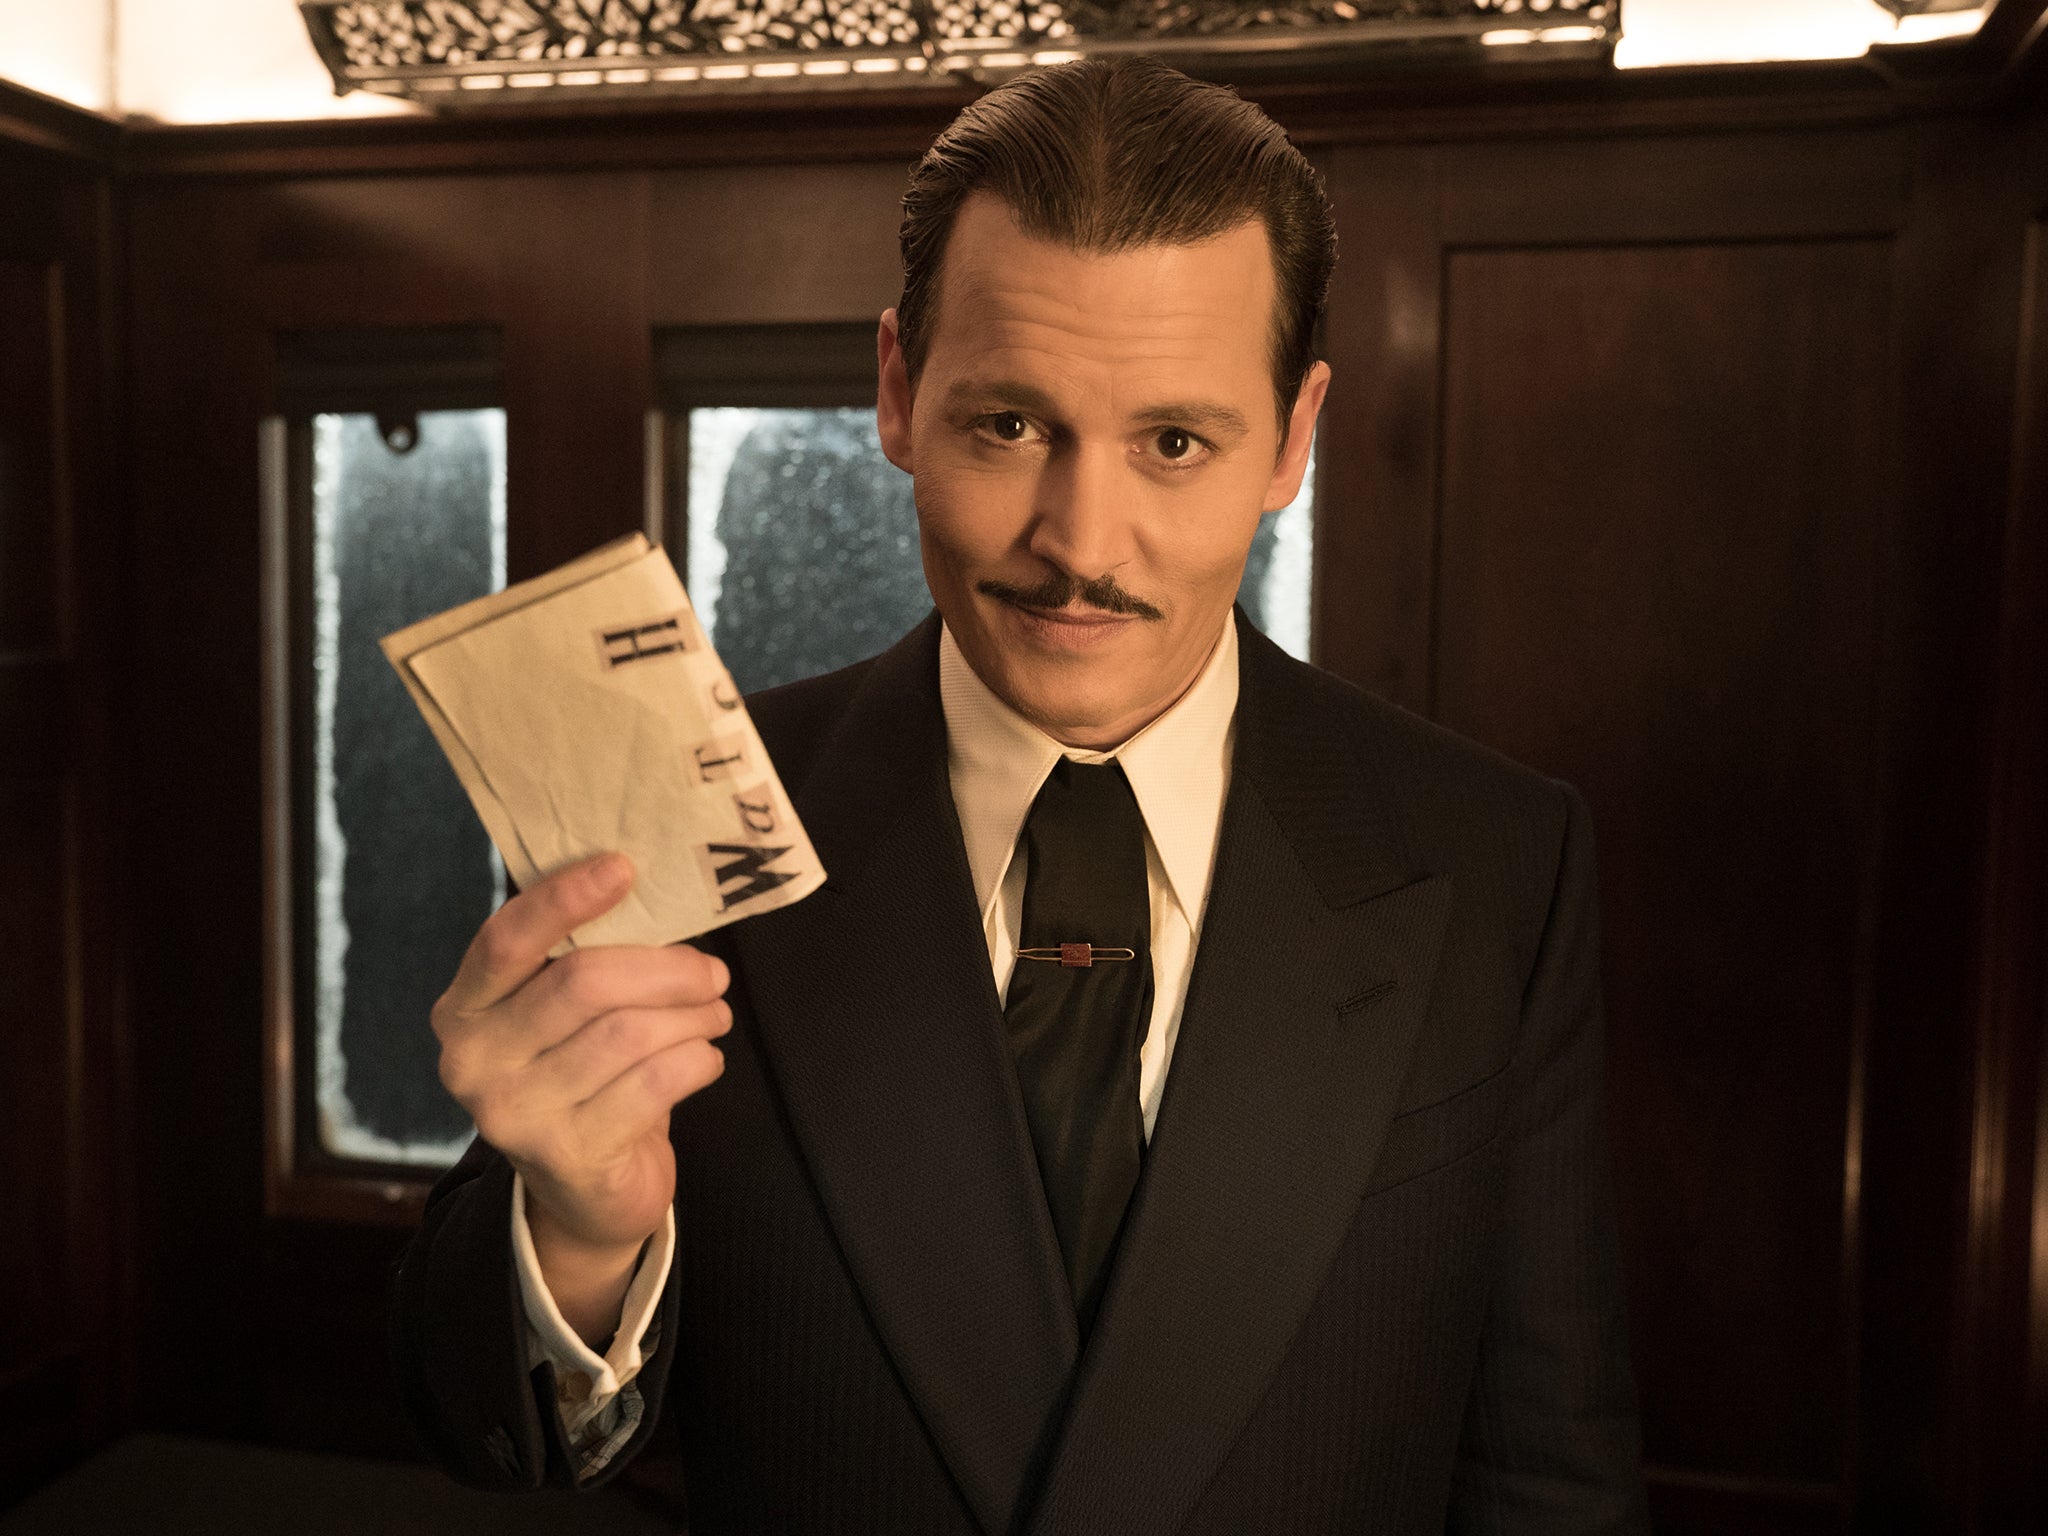 Johnny Depp’s character in ‘Murder on the Orient Express’ has a very sleek, neatly cut moustache